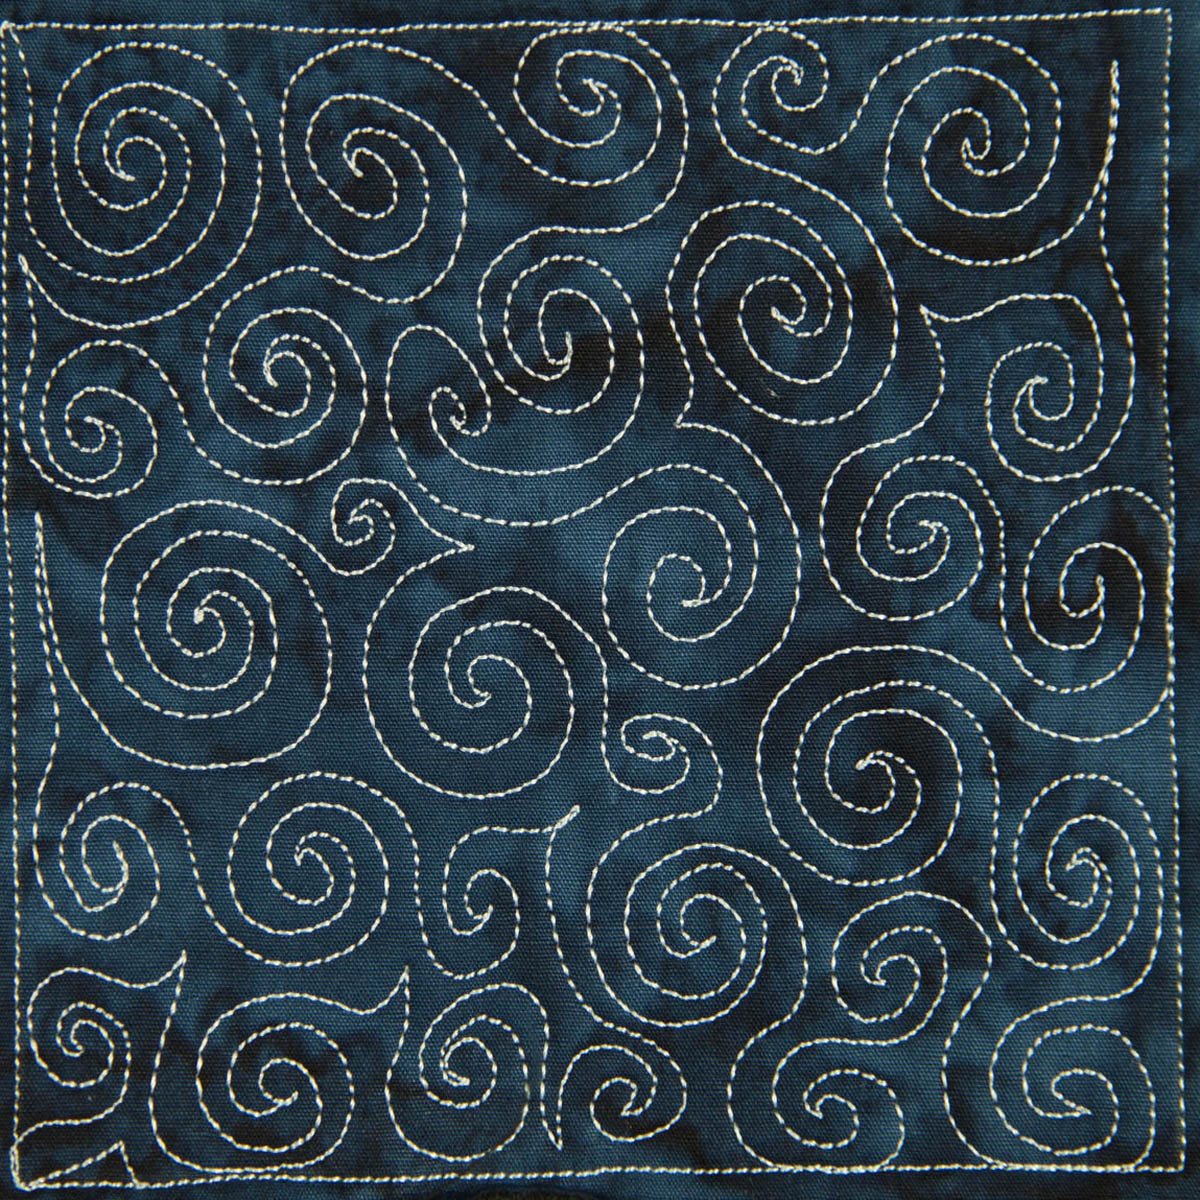 The Free Motion Quilting Project Day 5 Basic Spiral